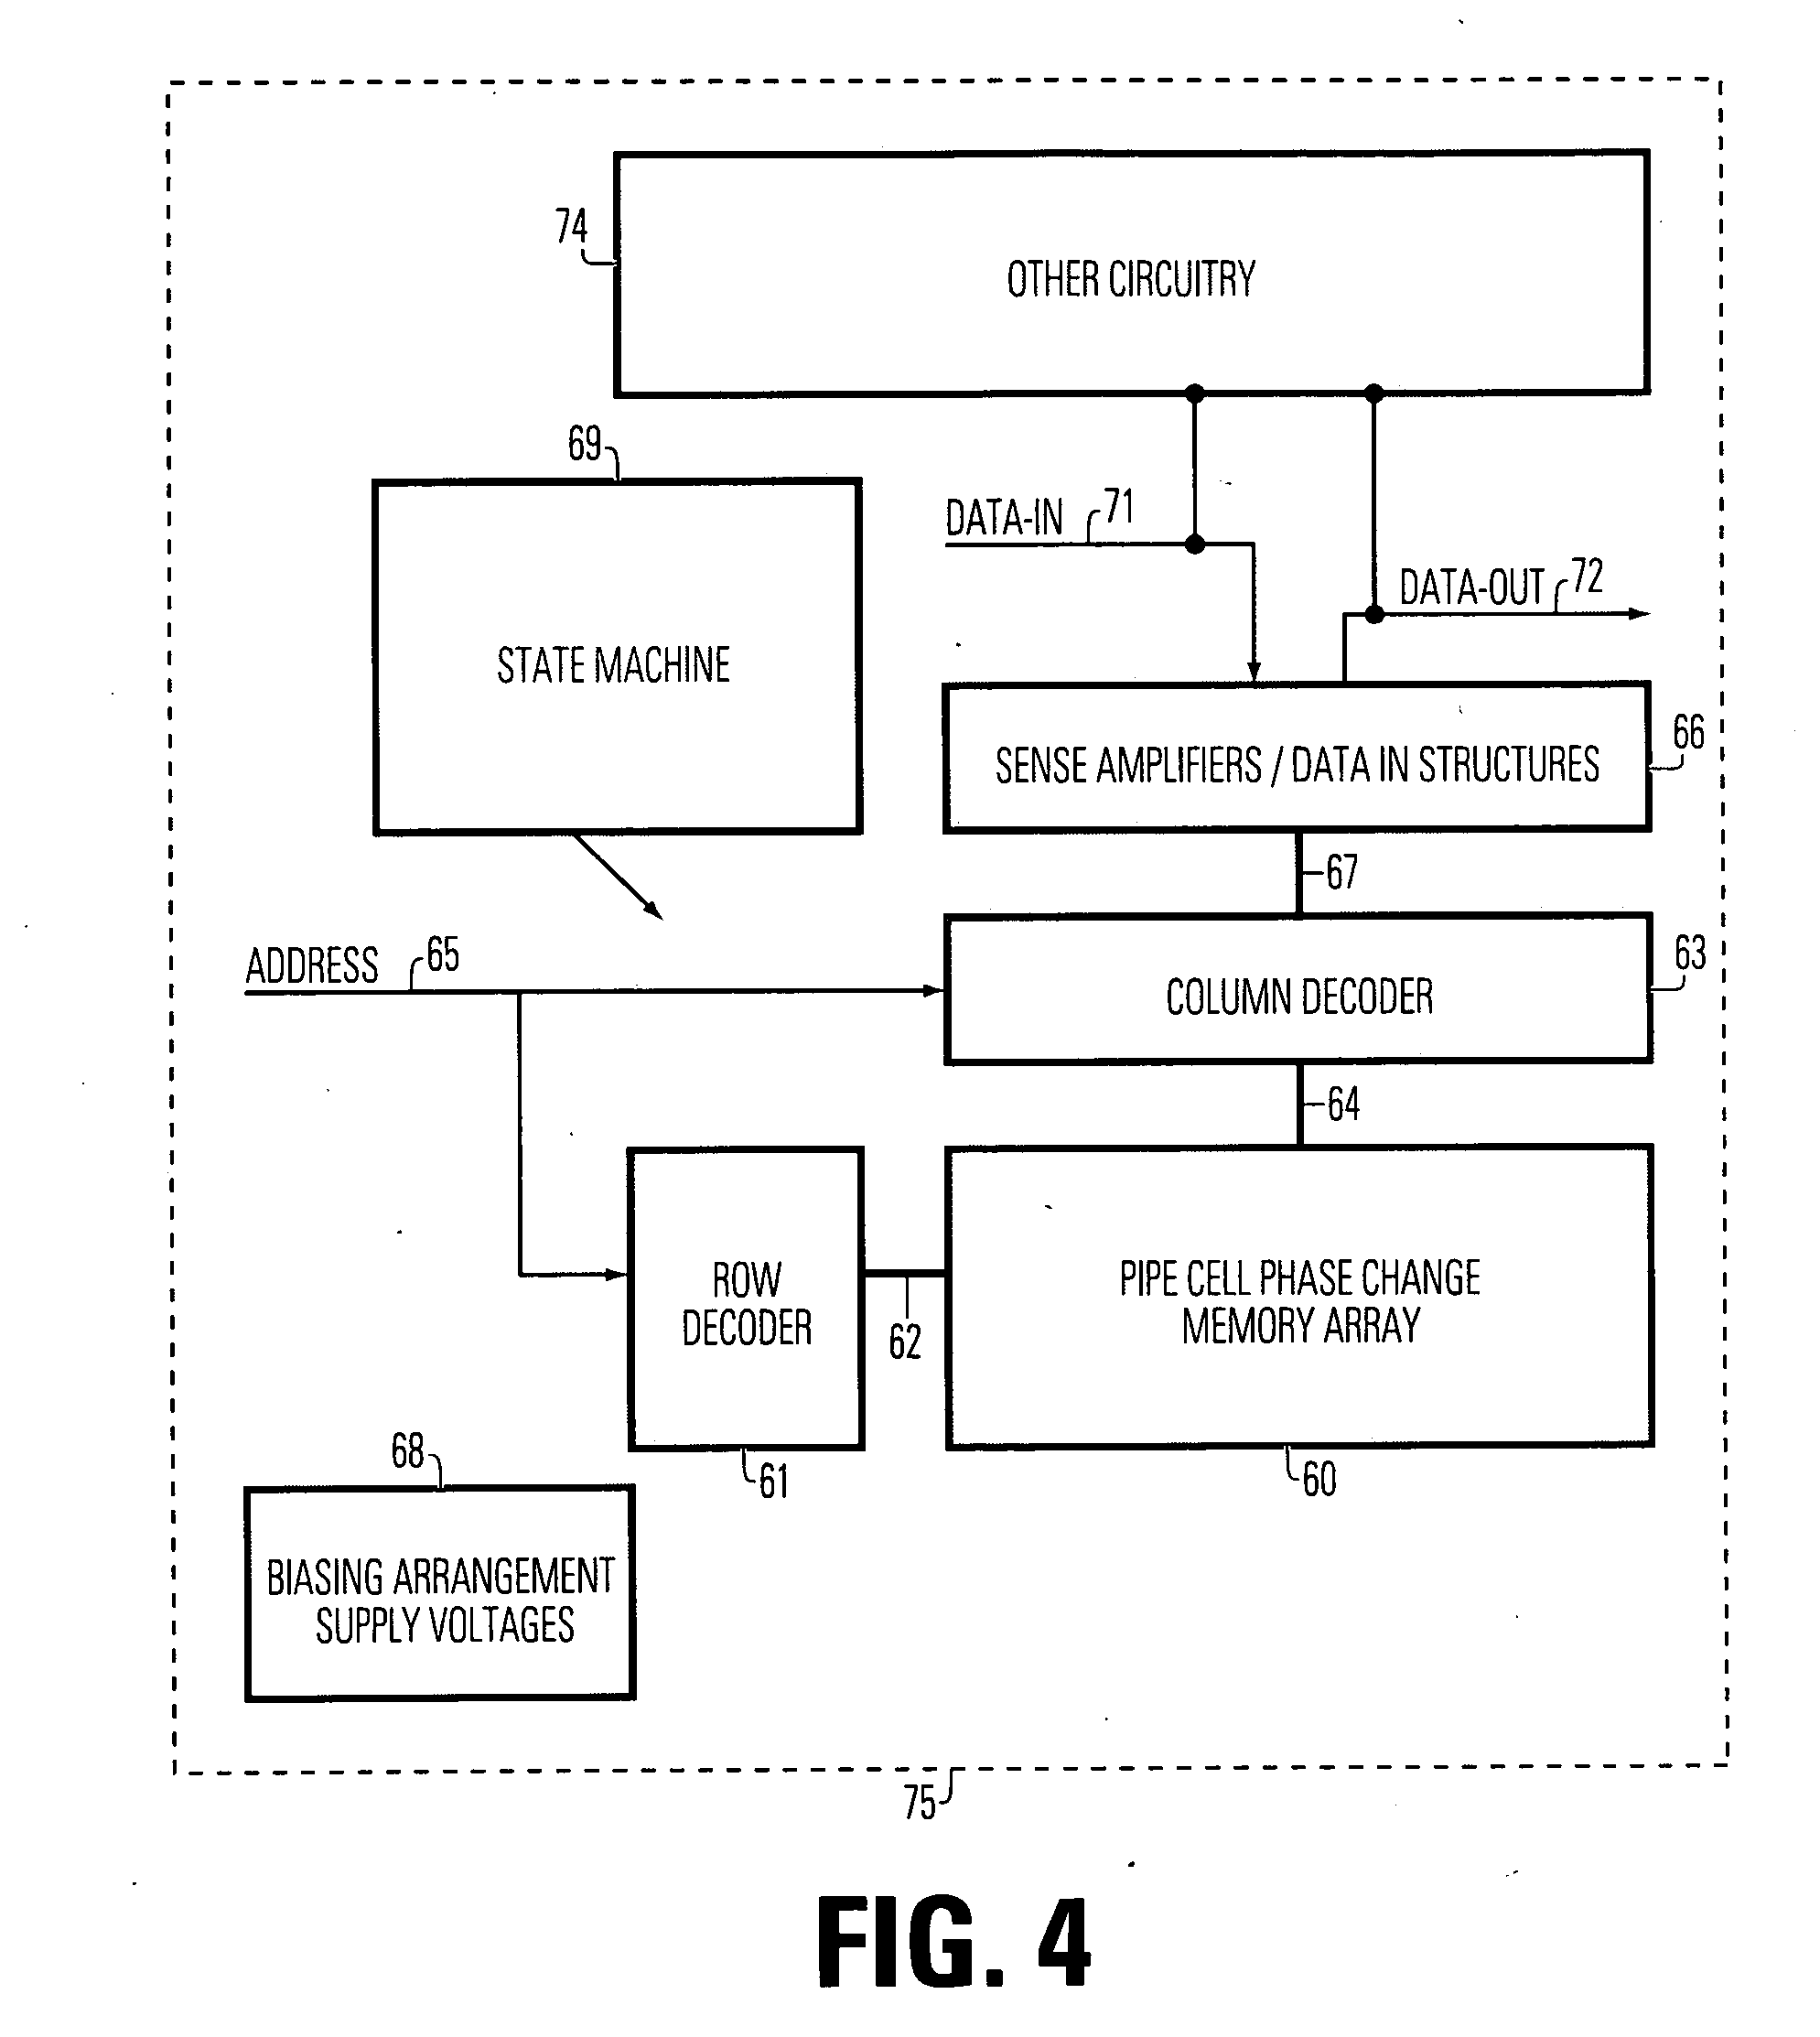 Pipe shaped phase change memory